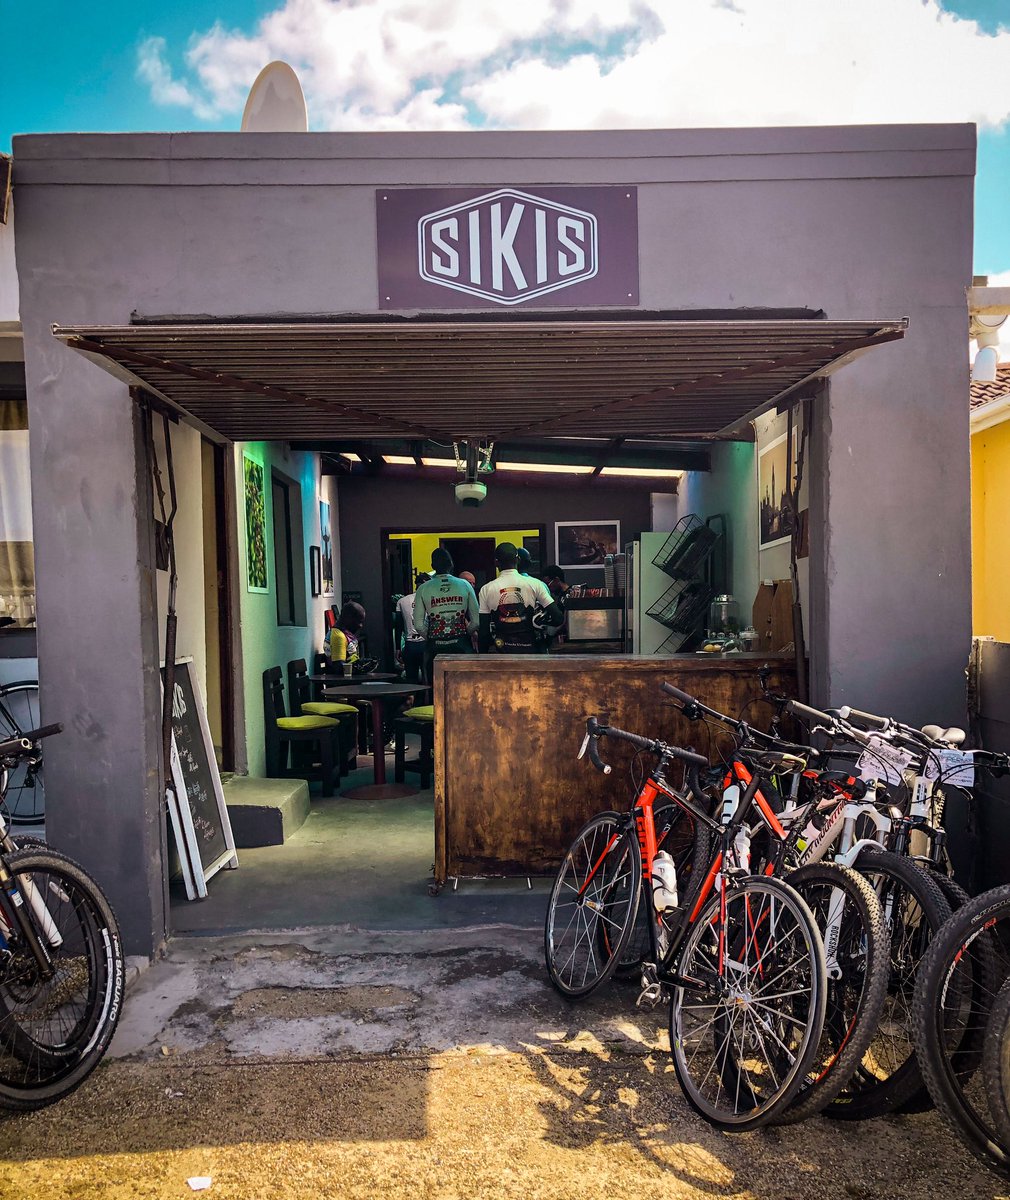 .@sikiskoffeekafe The Hotchillee coffee partner for Cape Town! The best coffee and vibe!